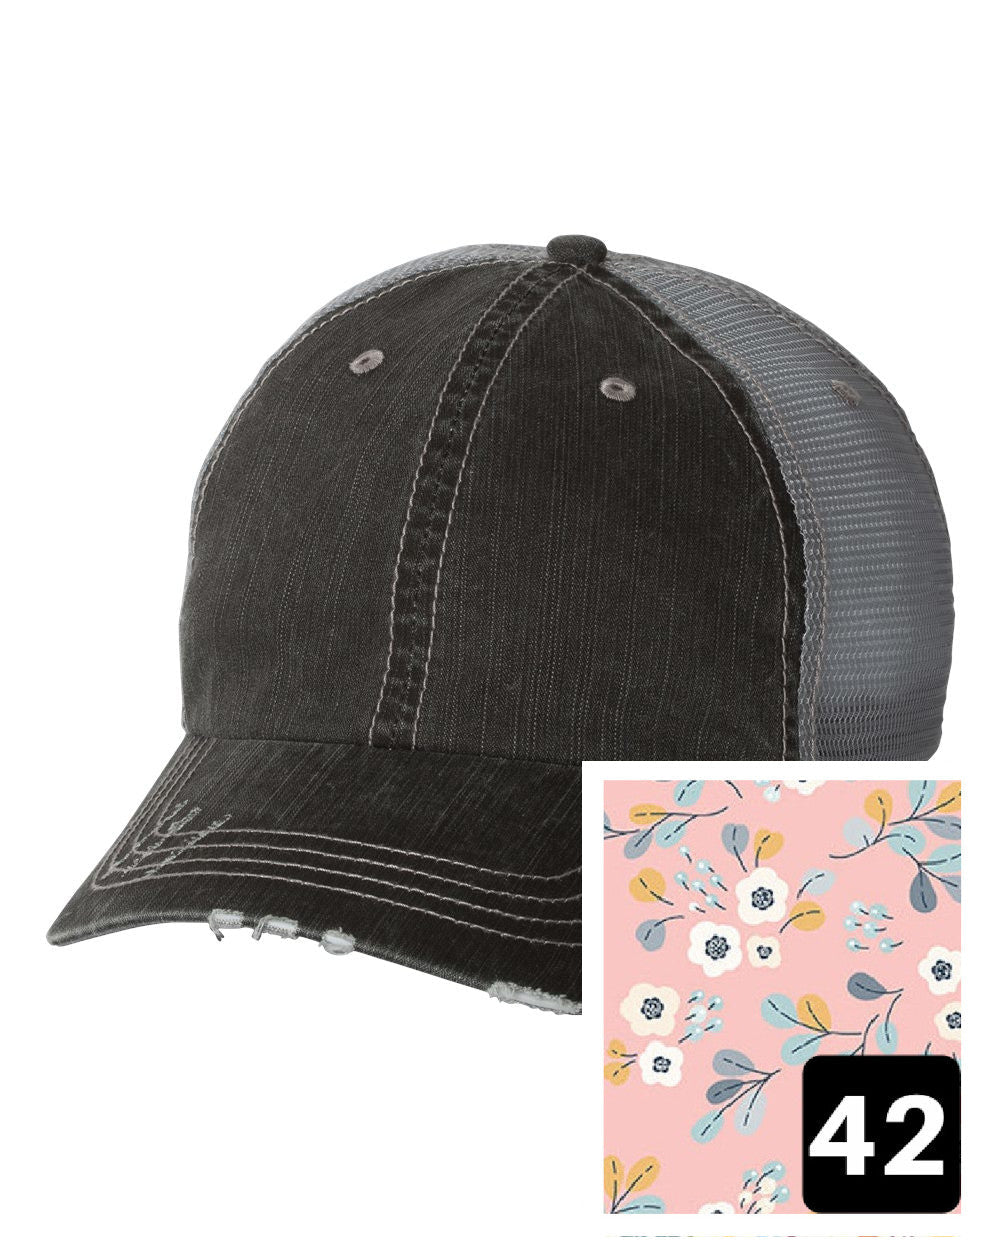 gray distressed trucker hat with light blue and pink mosaic fabric state of Hawaii